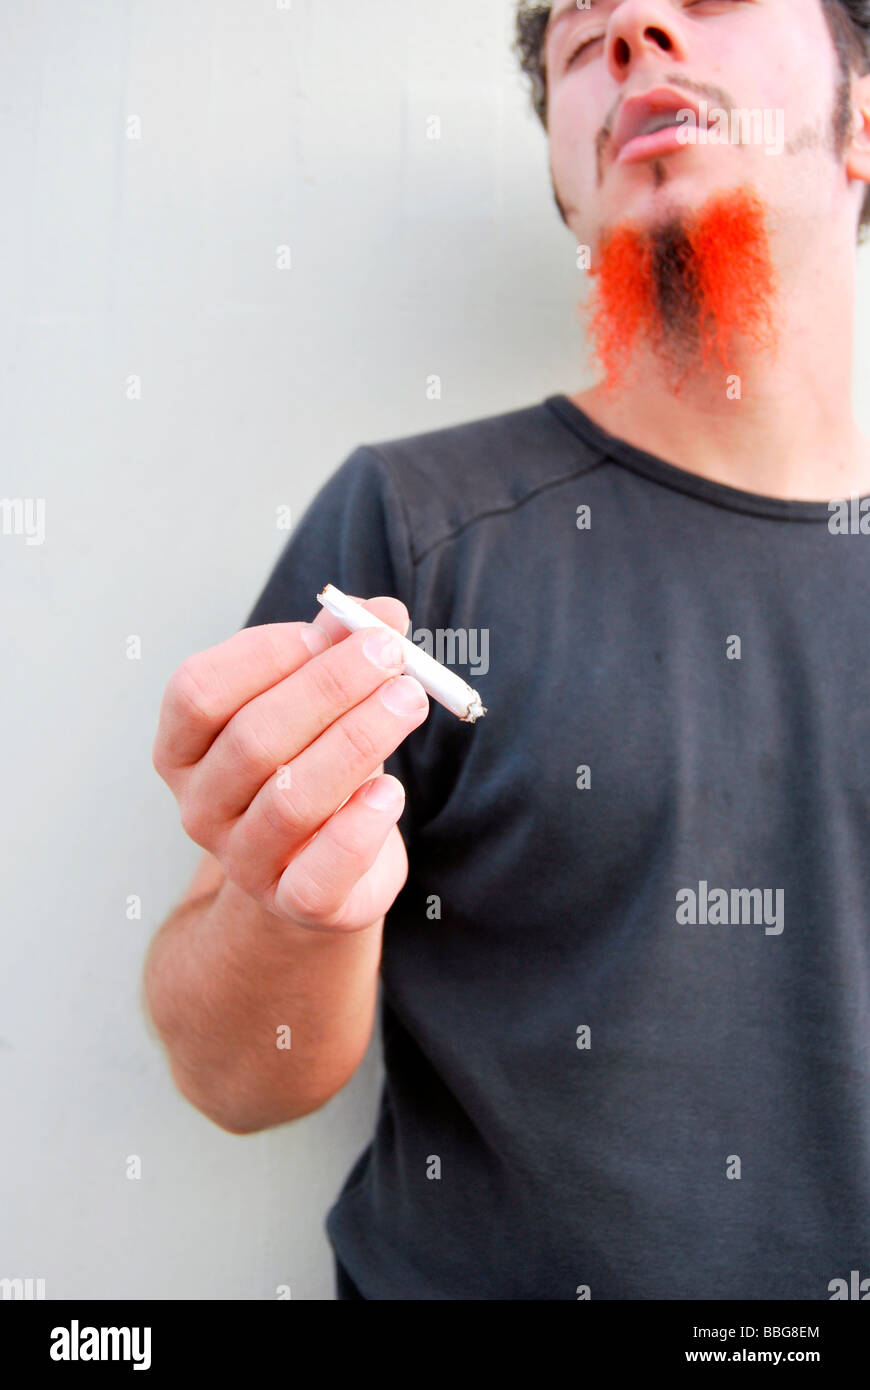 Drugs, young man with red-black beard holding a joint, hand-rolled cigarette Stock Photo